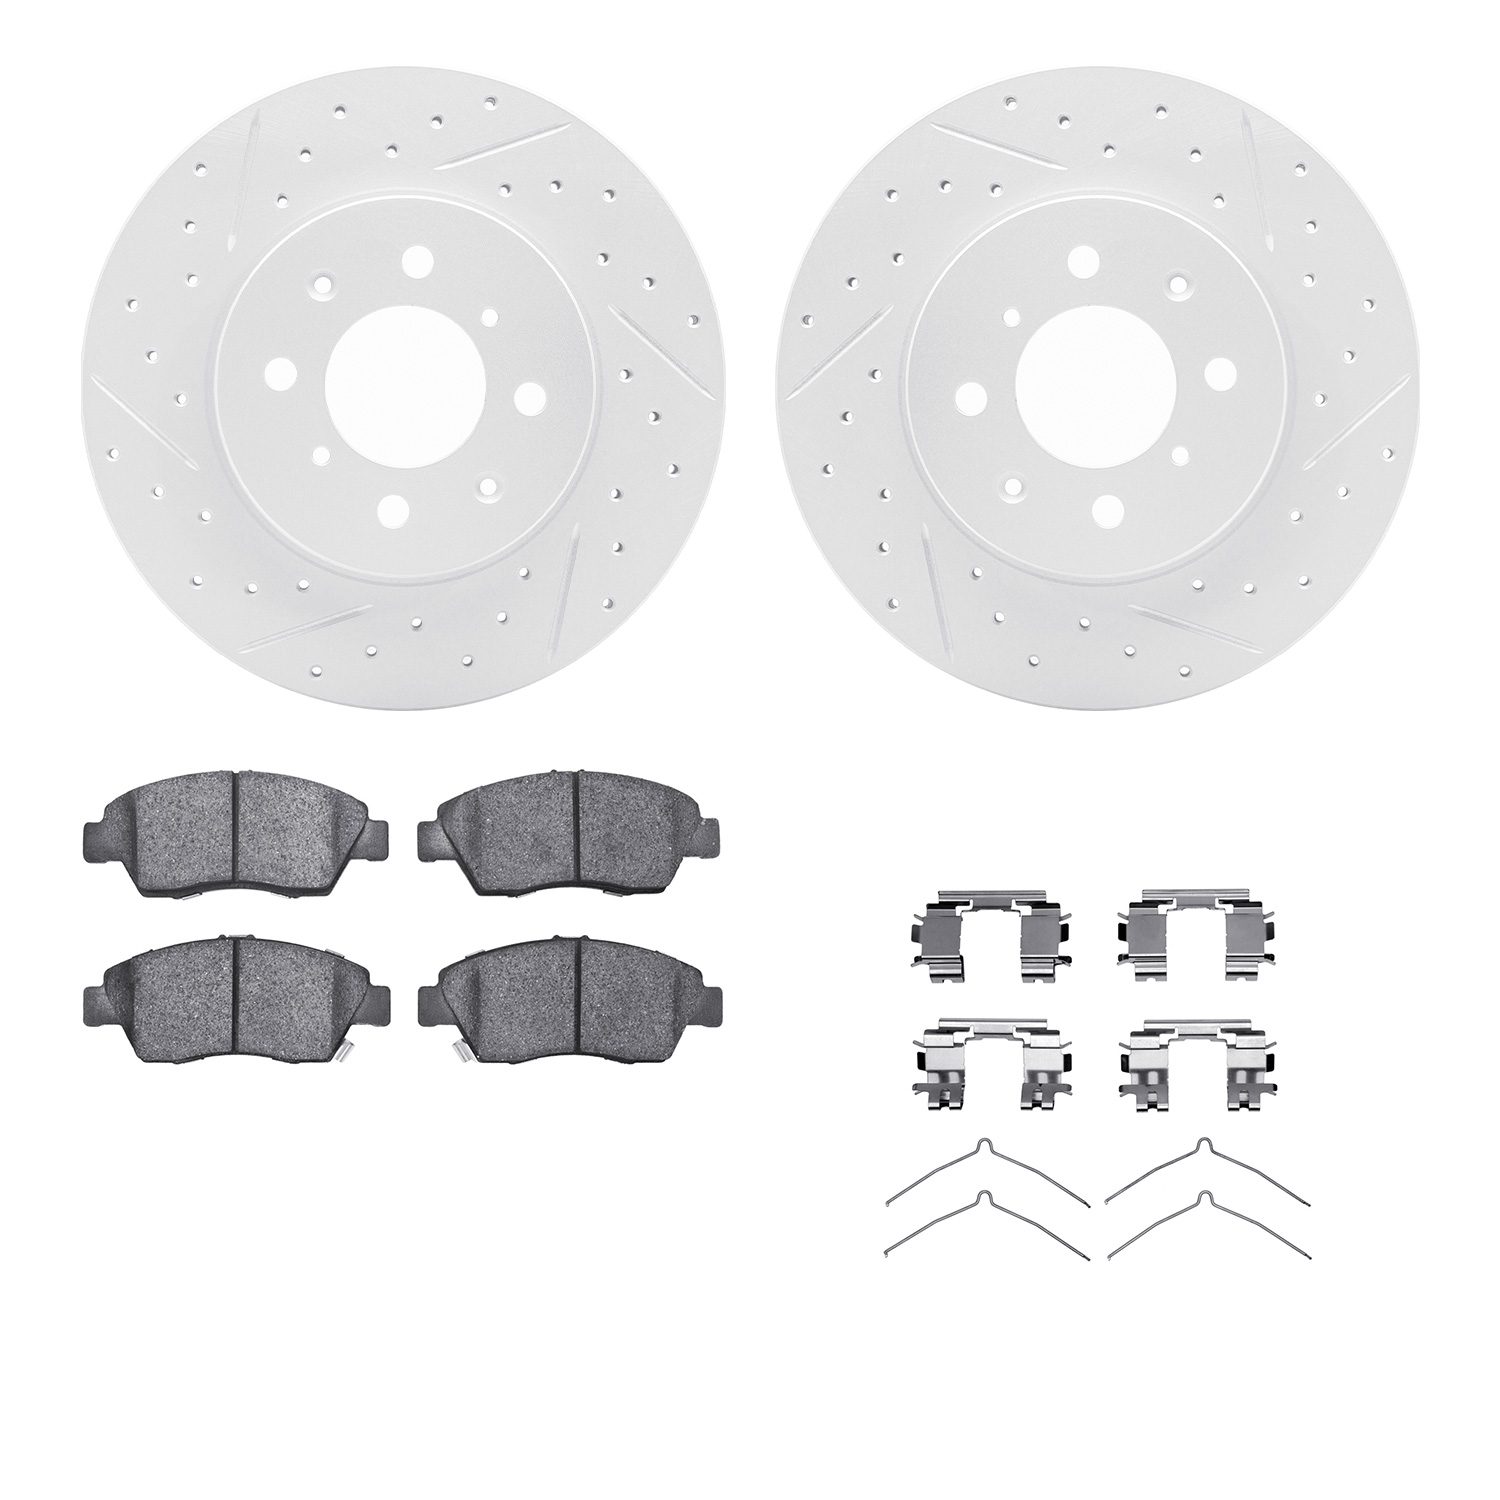 2512-59010 Geoperformance Drilled/Slotted Rotors w/5000 Advanced Brake Pads Kit & Hardware, 2003-2008 Acura/Honda, Position: Fro